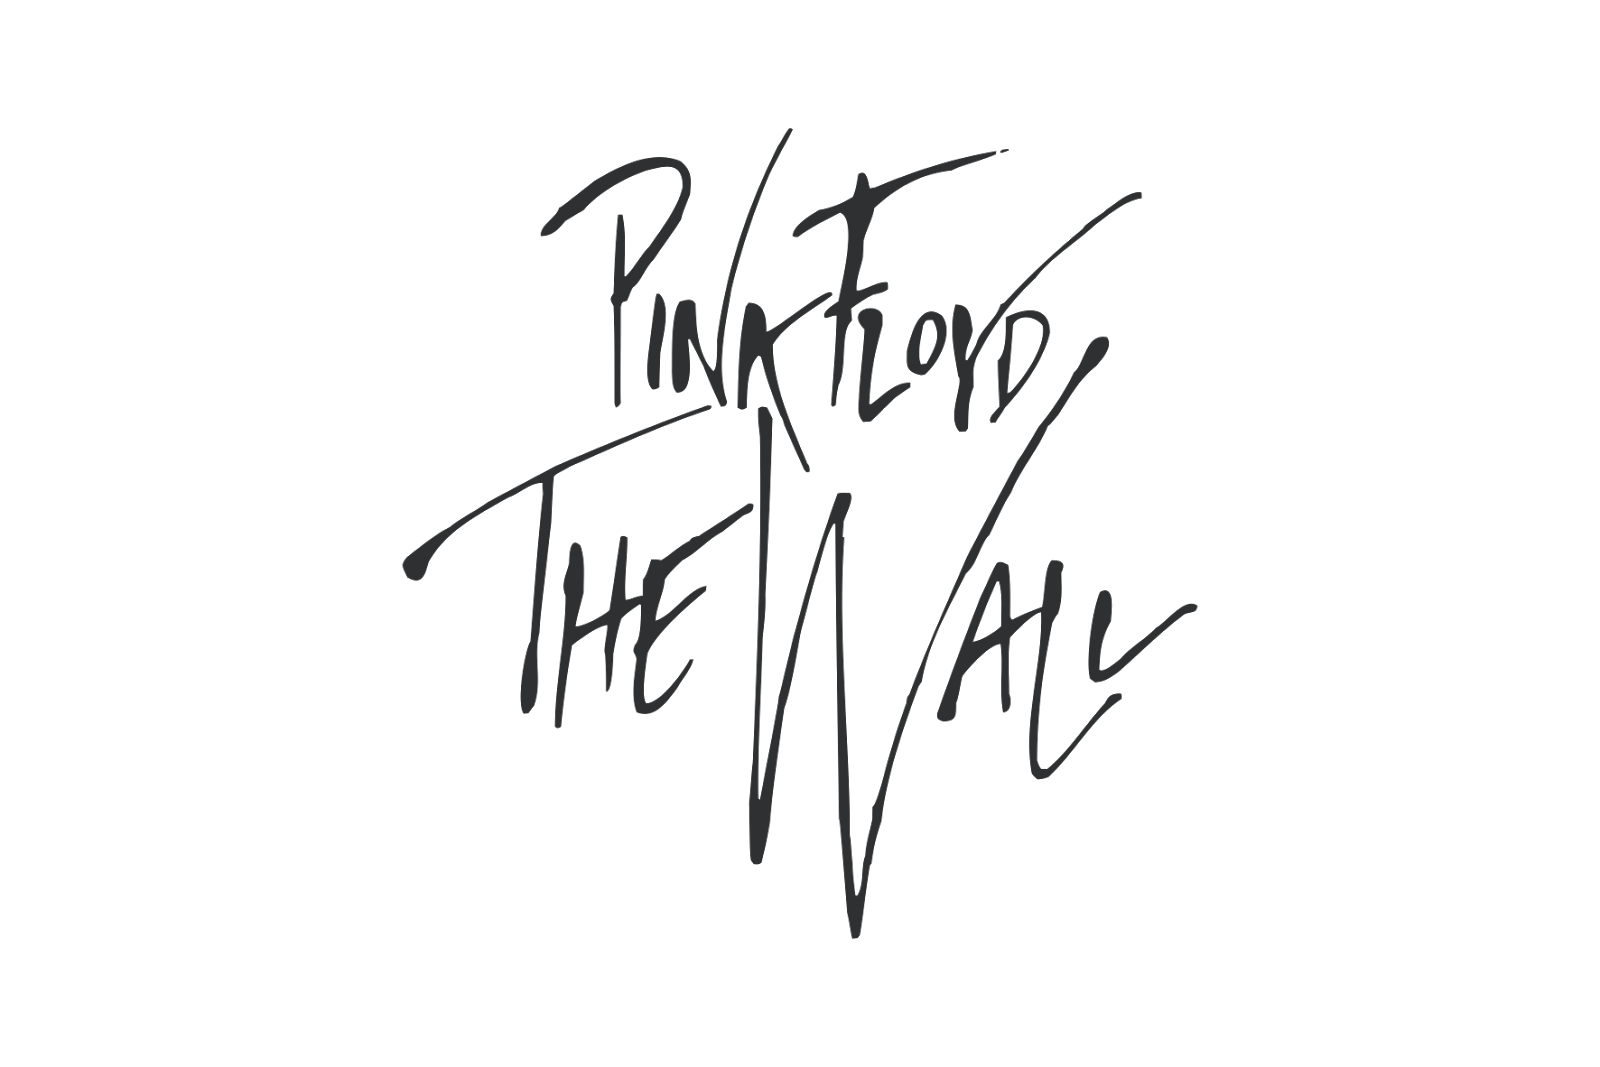 Great Title the Walls Logo - Pink Floyd - The Wall Logo - logo cdr vector